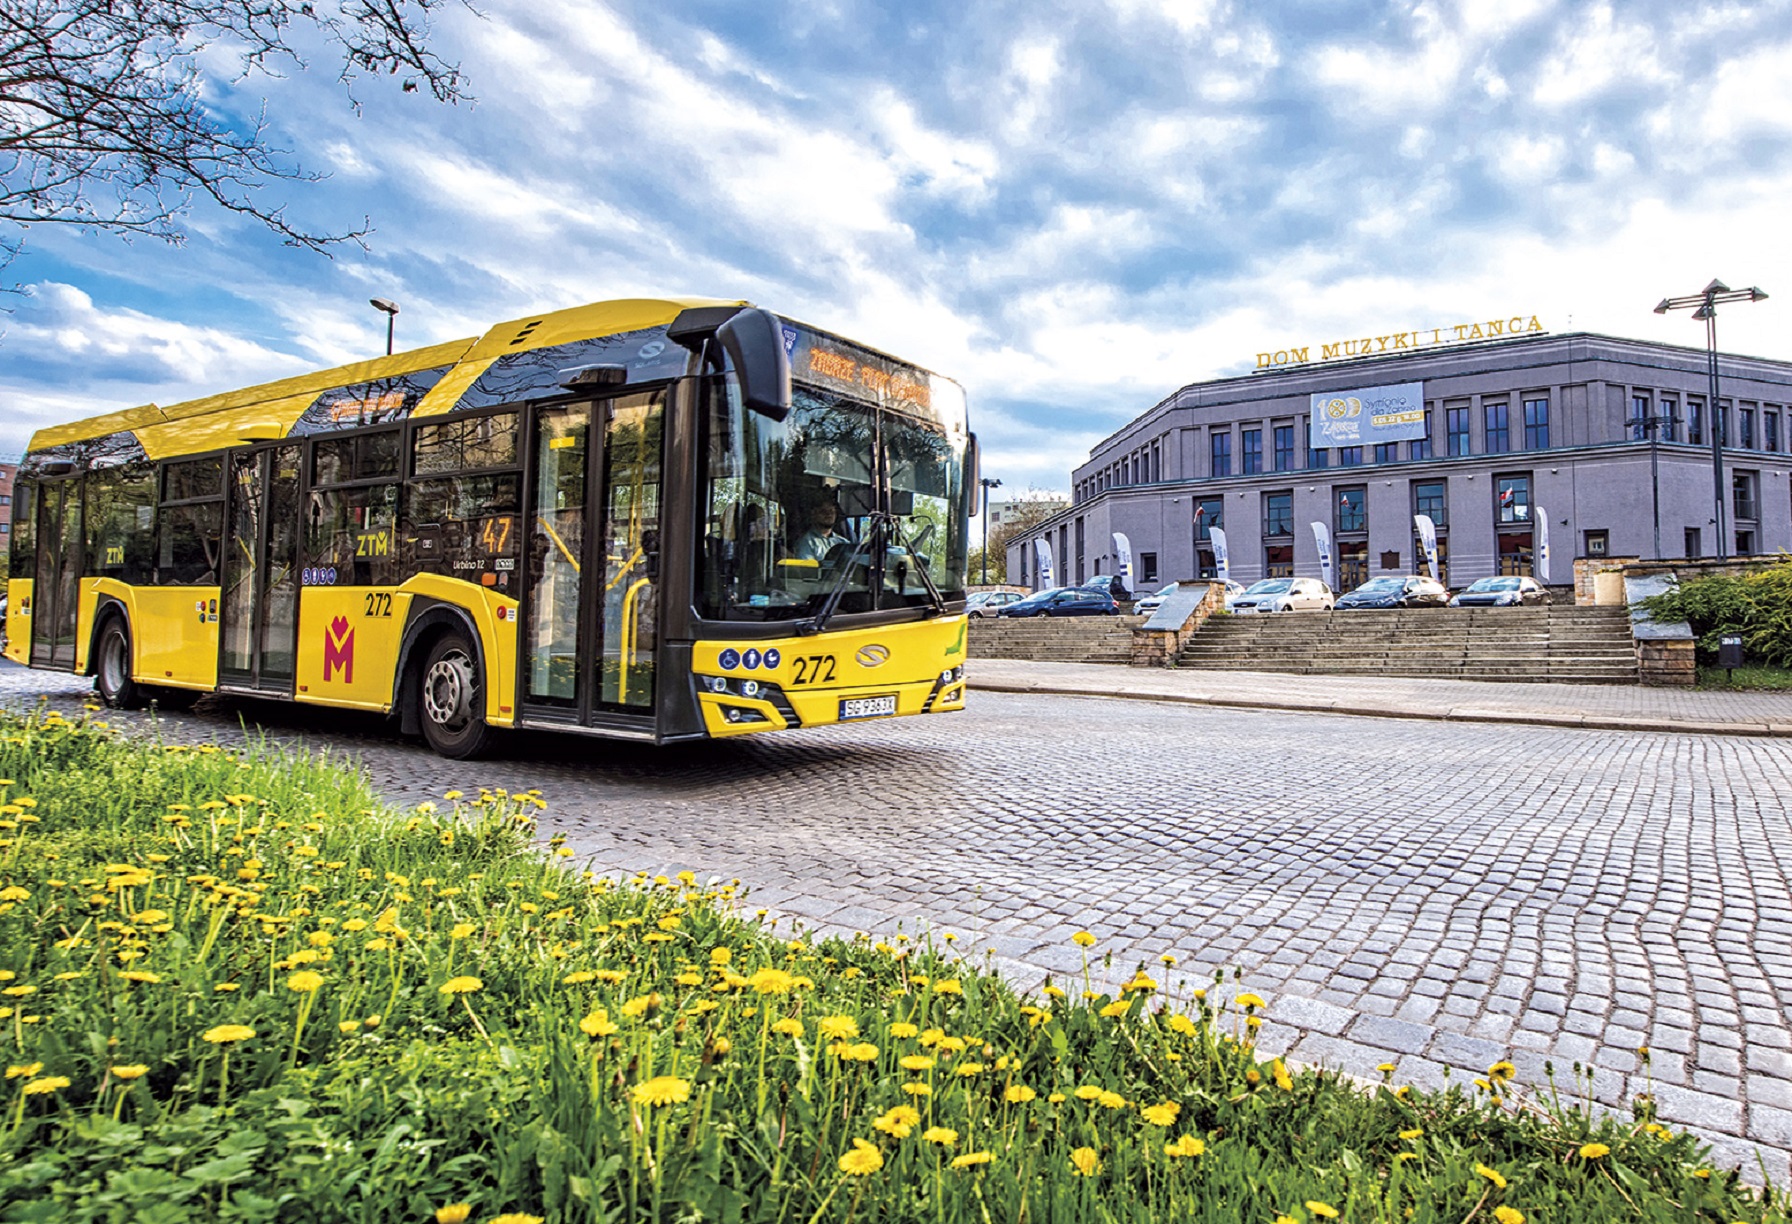 Artwork of the article Contracts worth PLN 270 million signed. 40 modern buses will appear on the GZM streets